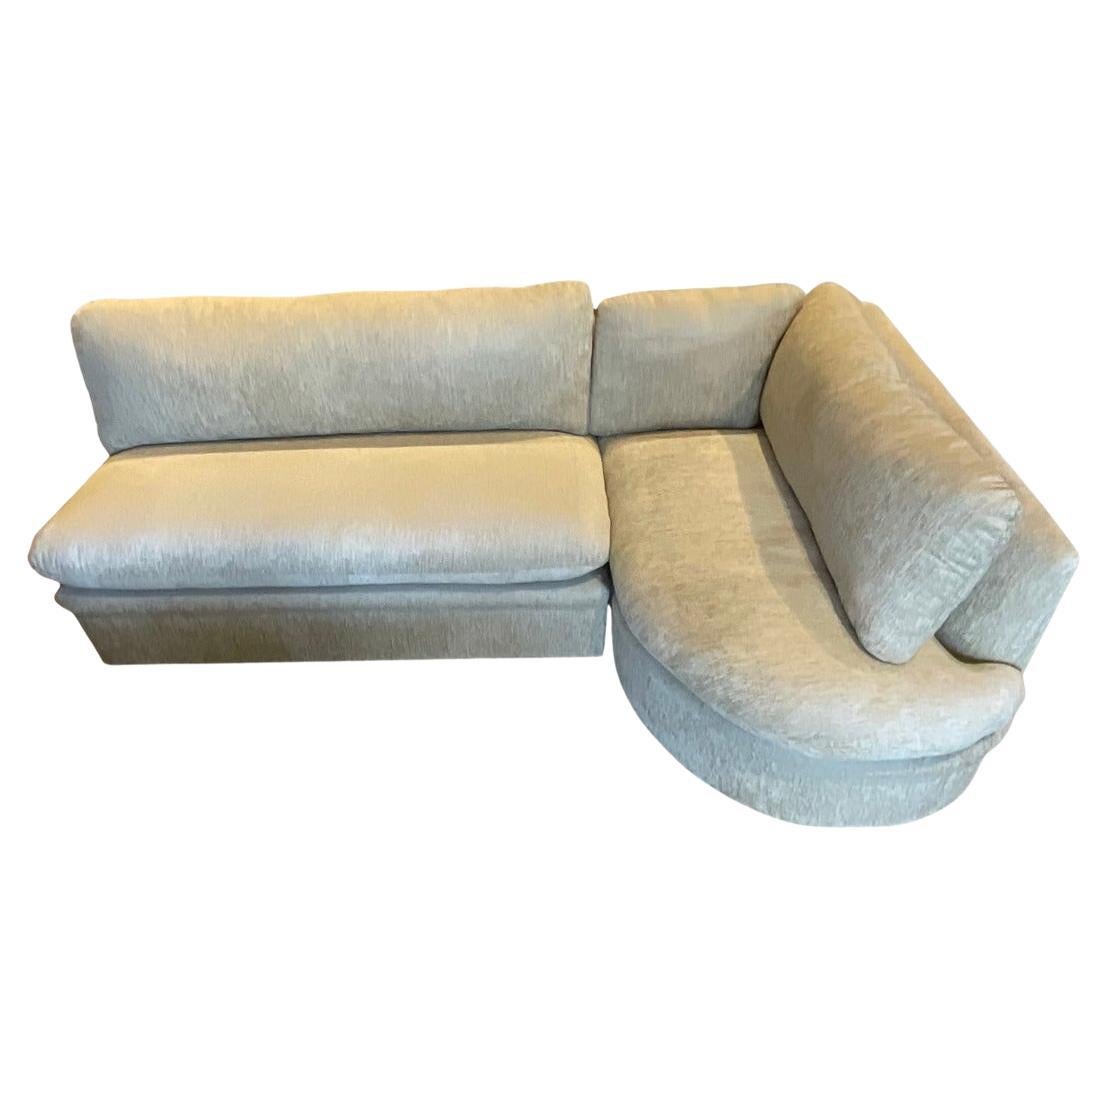 Steve Chase Style Sectional Sofa For Sale